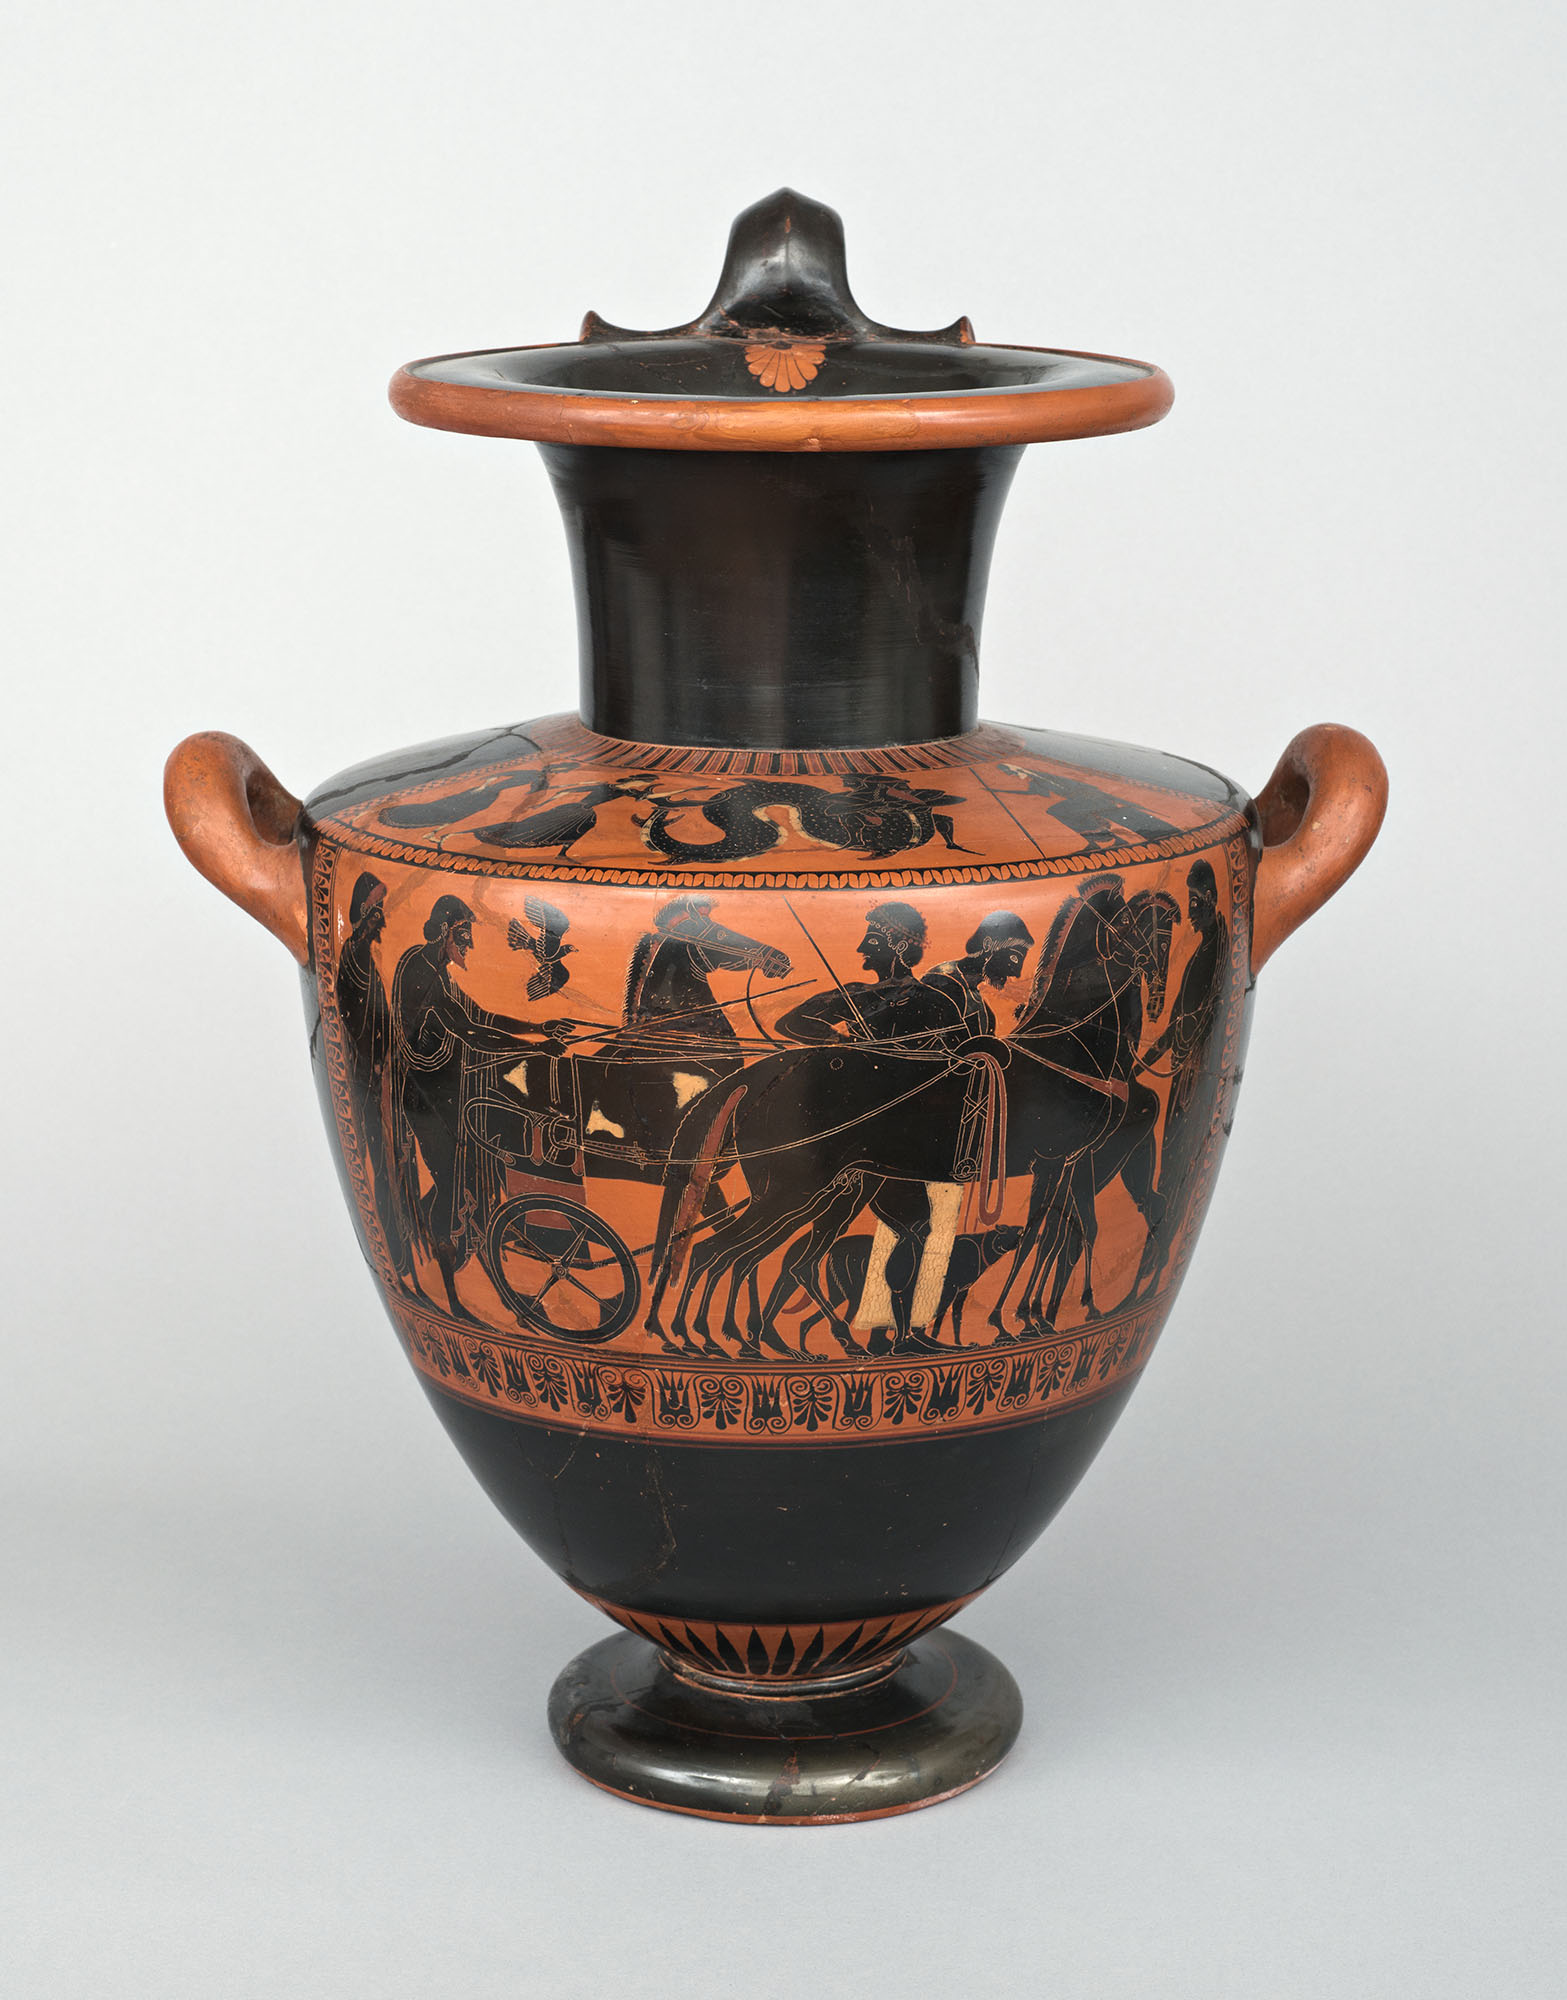 Hydria Greece, Athens, c. 530–500 B.C.E. Psiax Clay, wheelmade, black-figure painted; 18 1/2 x 15 1/2 in. Wadsworth Atheneum Museum of Art The Ella Gallup Sumner and Mary Catlin Sumner Collection Fund, 1961.8